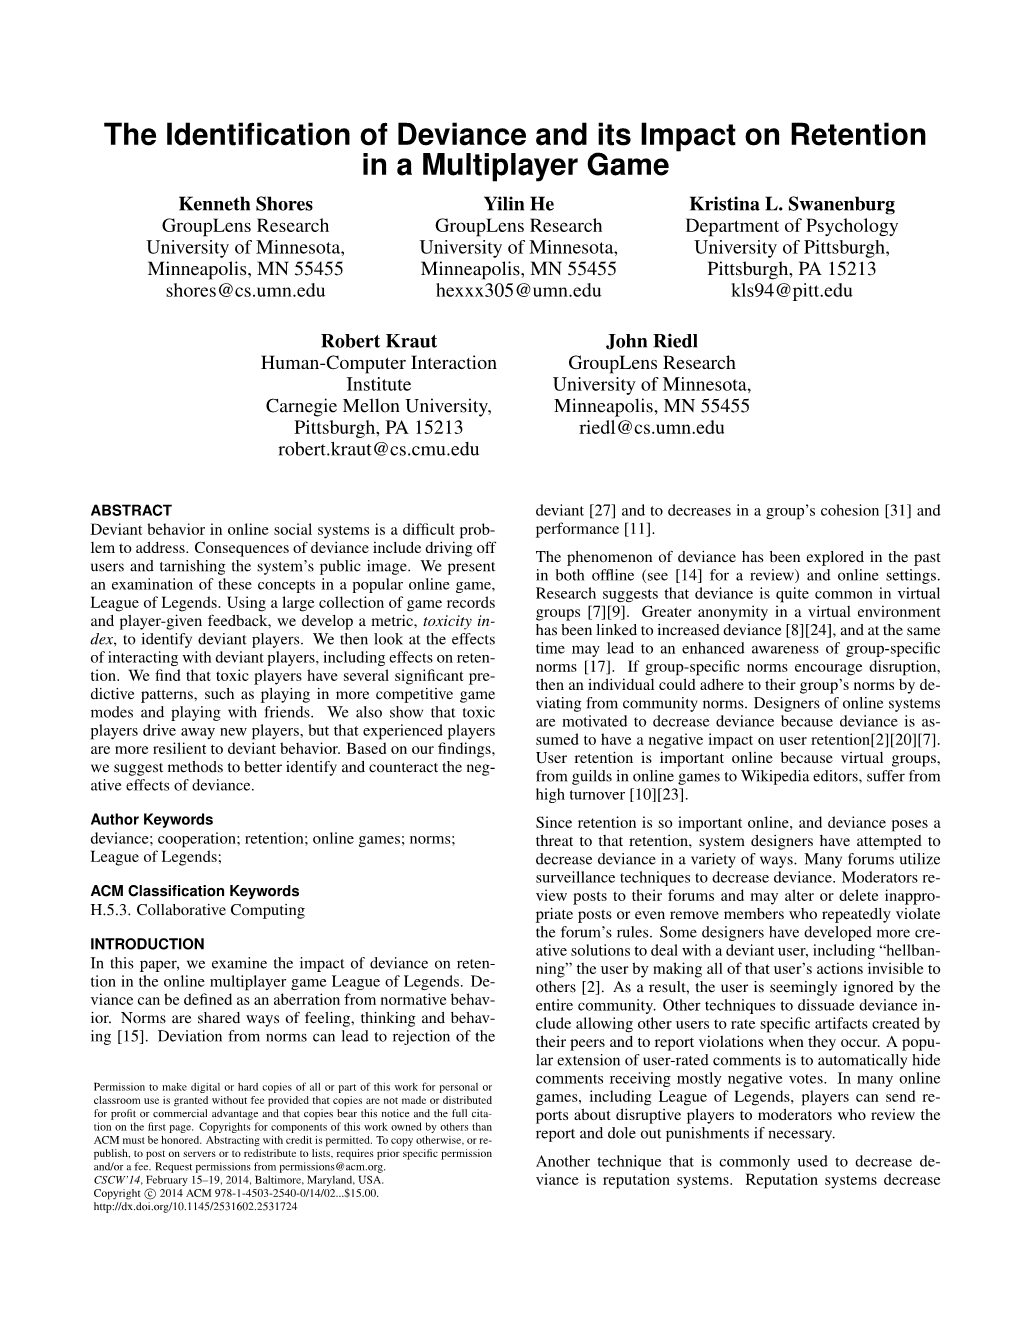 The Identification of Deviance and Its Impact on Retention in a Multiplayer Game